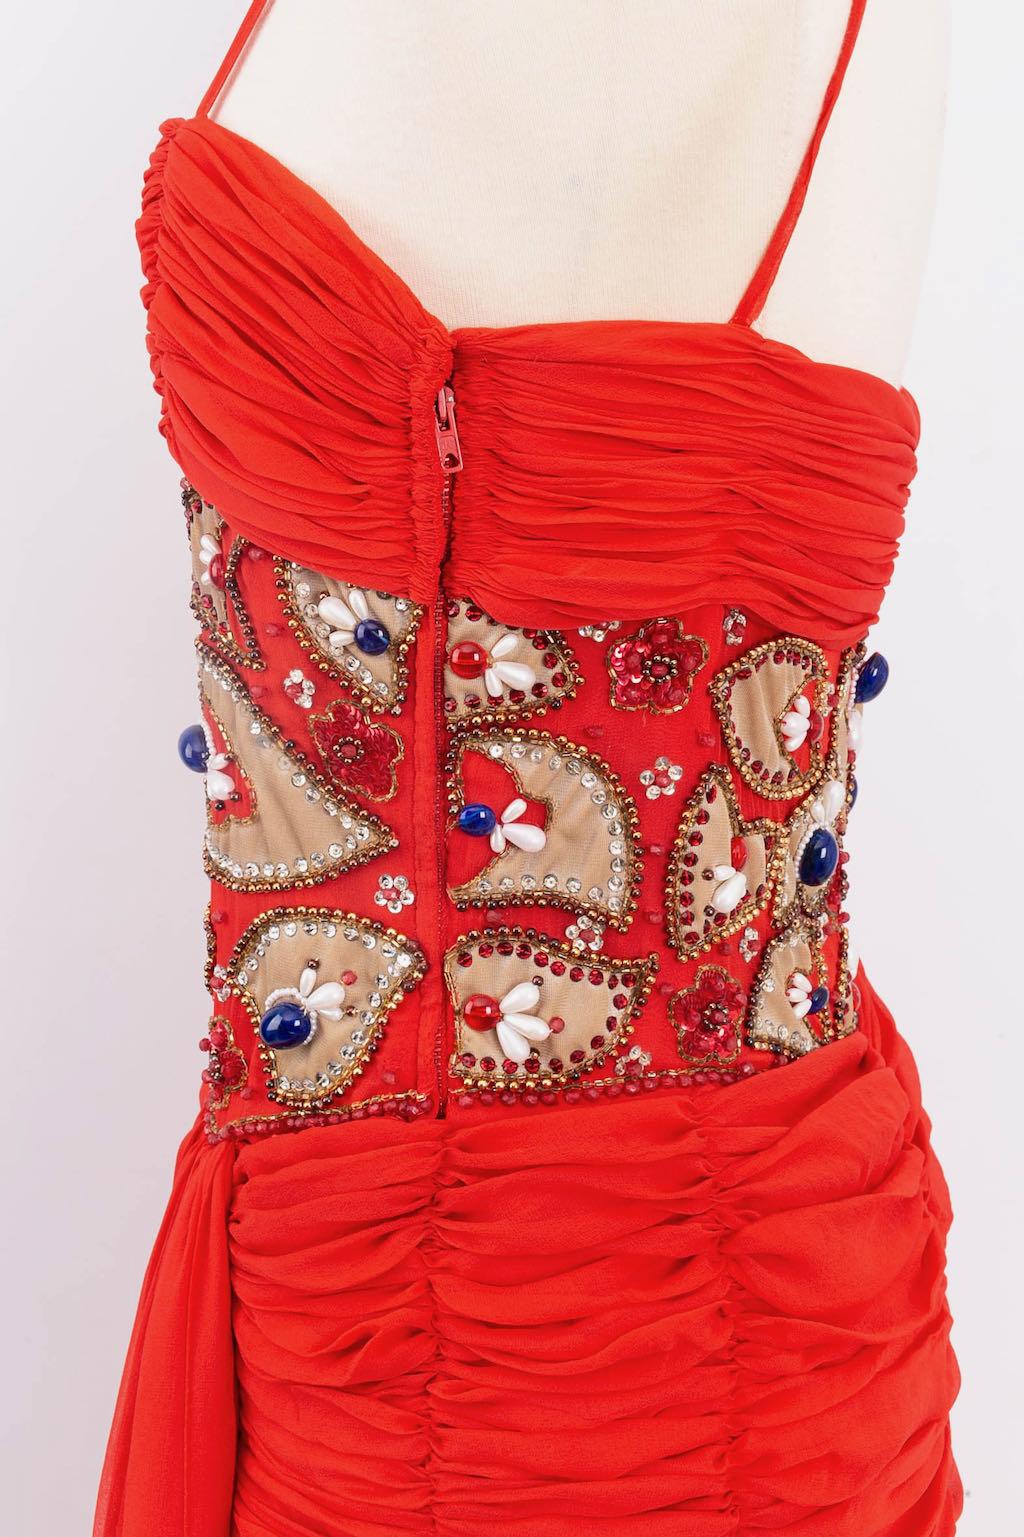 Givenchy Haute Couture Bustier Embroidered Silk Chiffon Dress For Sale 7